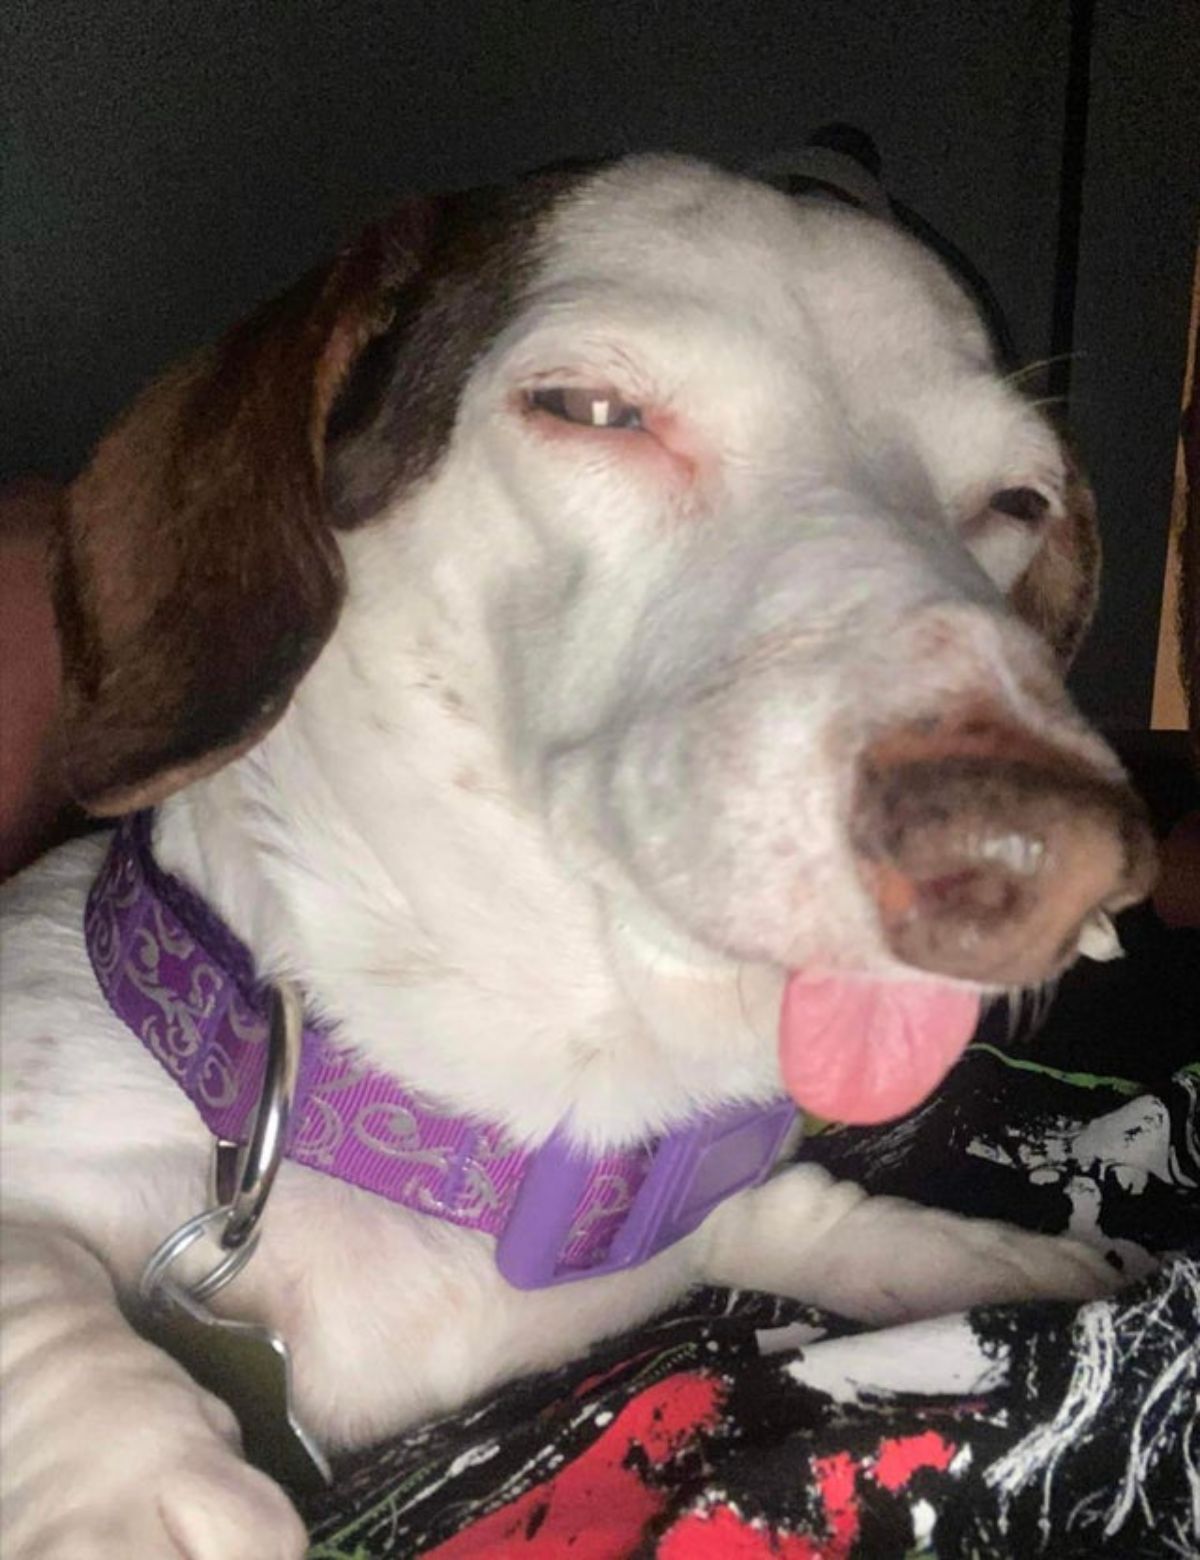 brown and white dog with a purple collar laying down with the tongue sticking out slightly and eyes narrowed